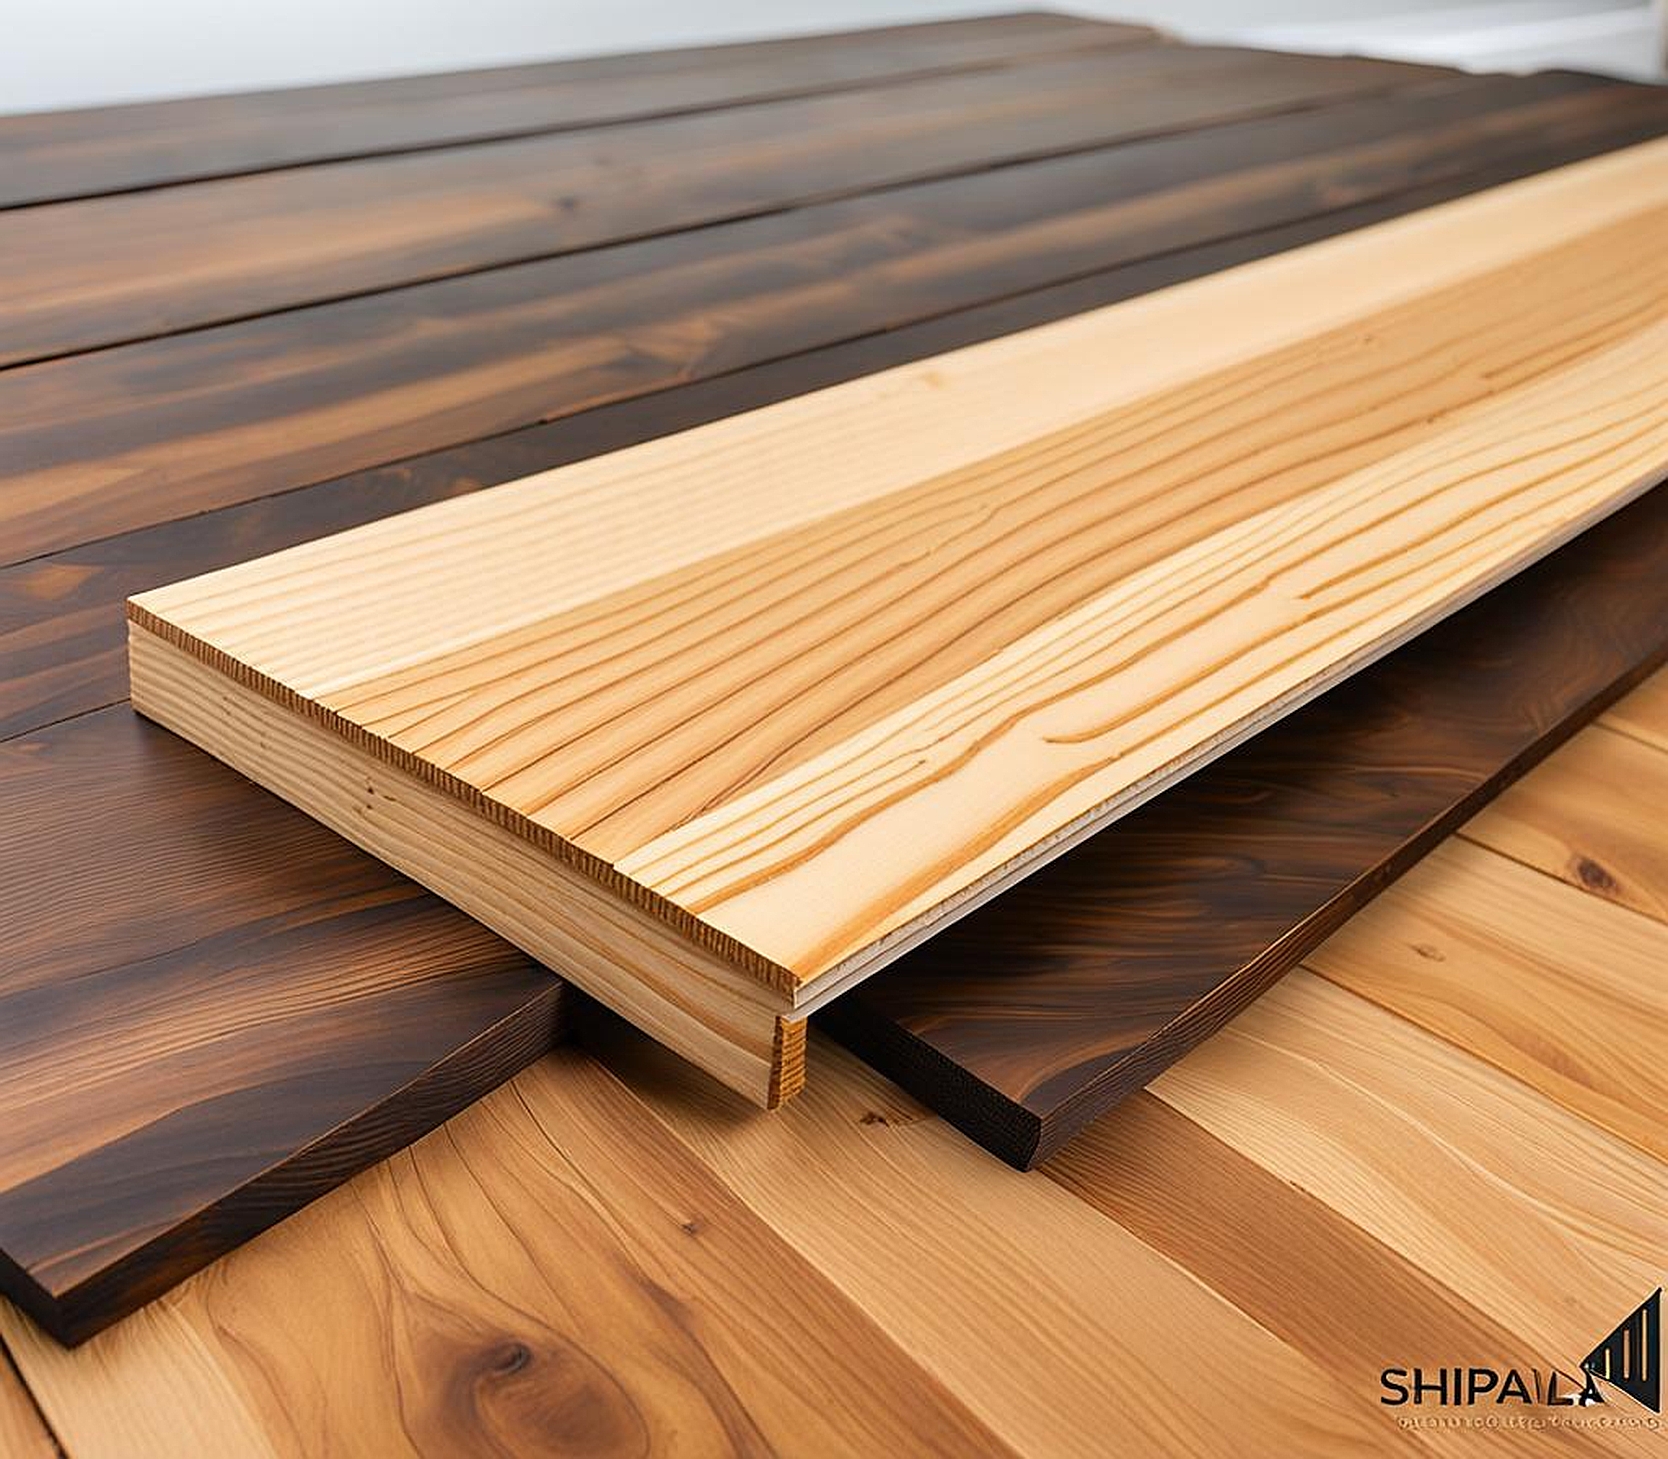 Step-By-Step Guide on How to Build Shiplap Boards